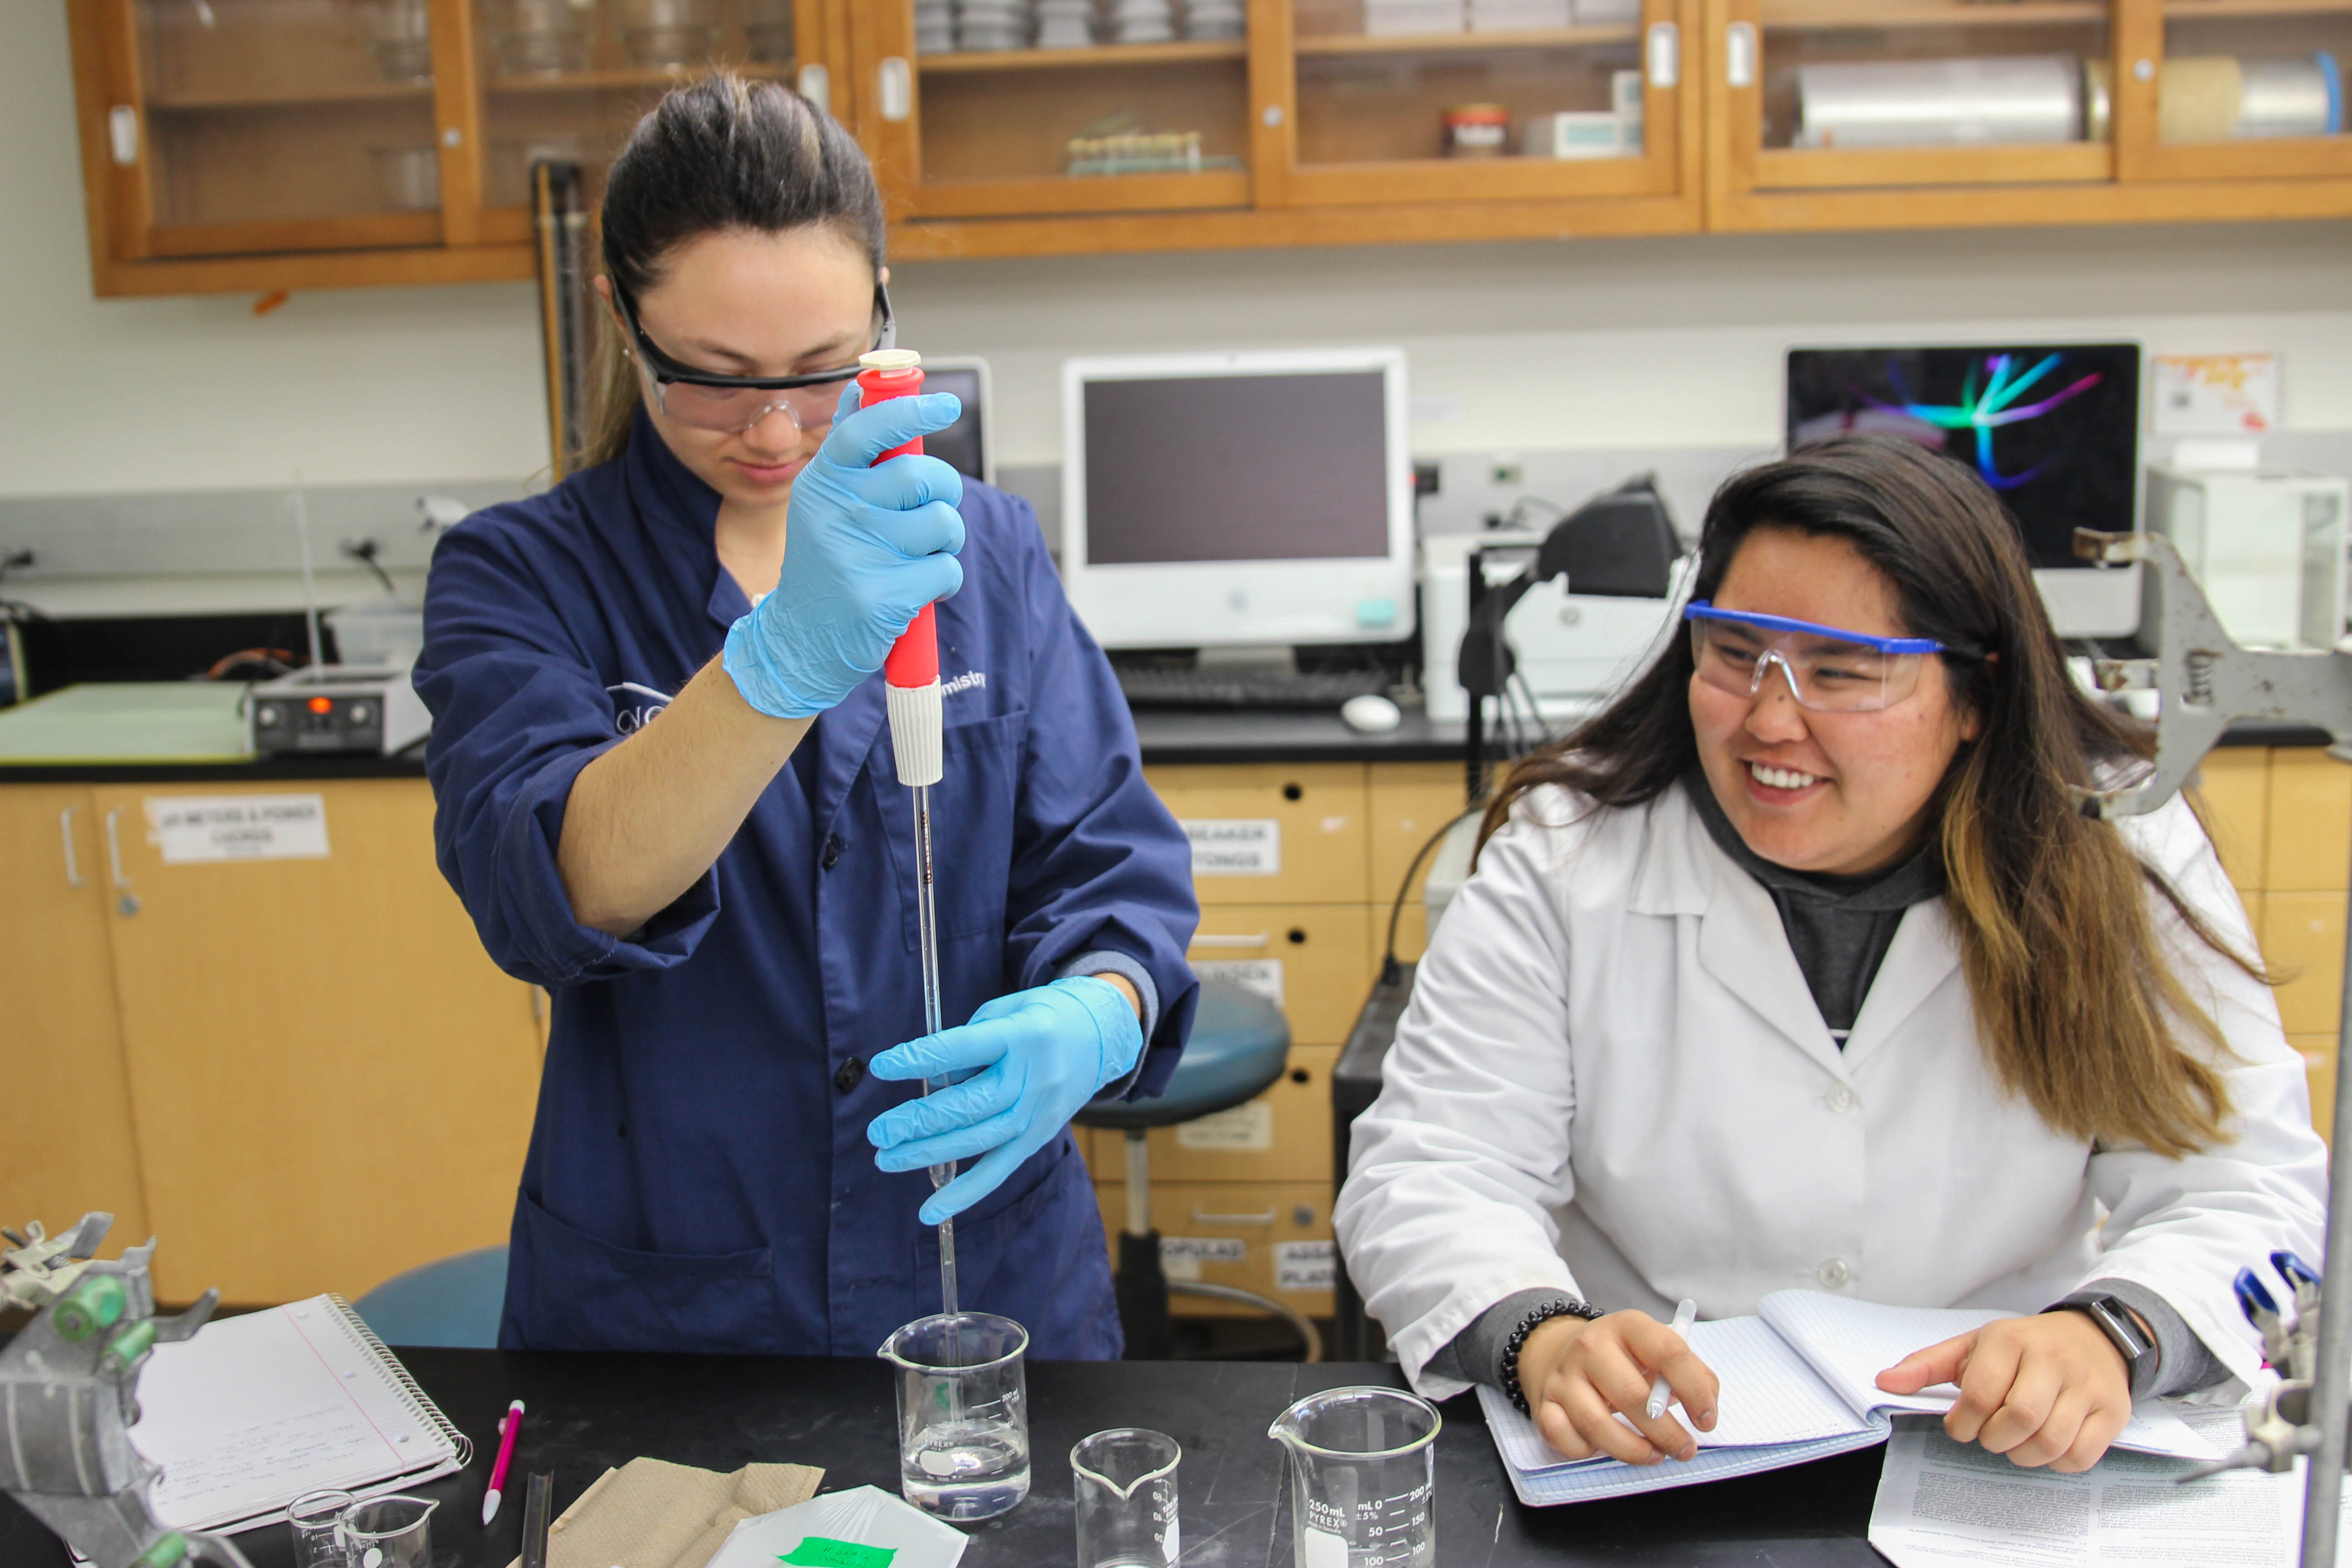 A chemistry student in a blue lab coat uses a pipette while another chemistry student takes notes